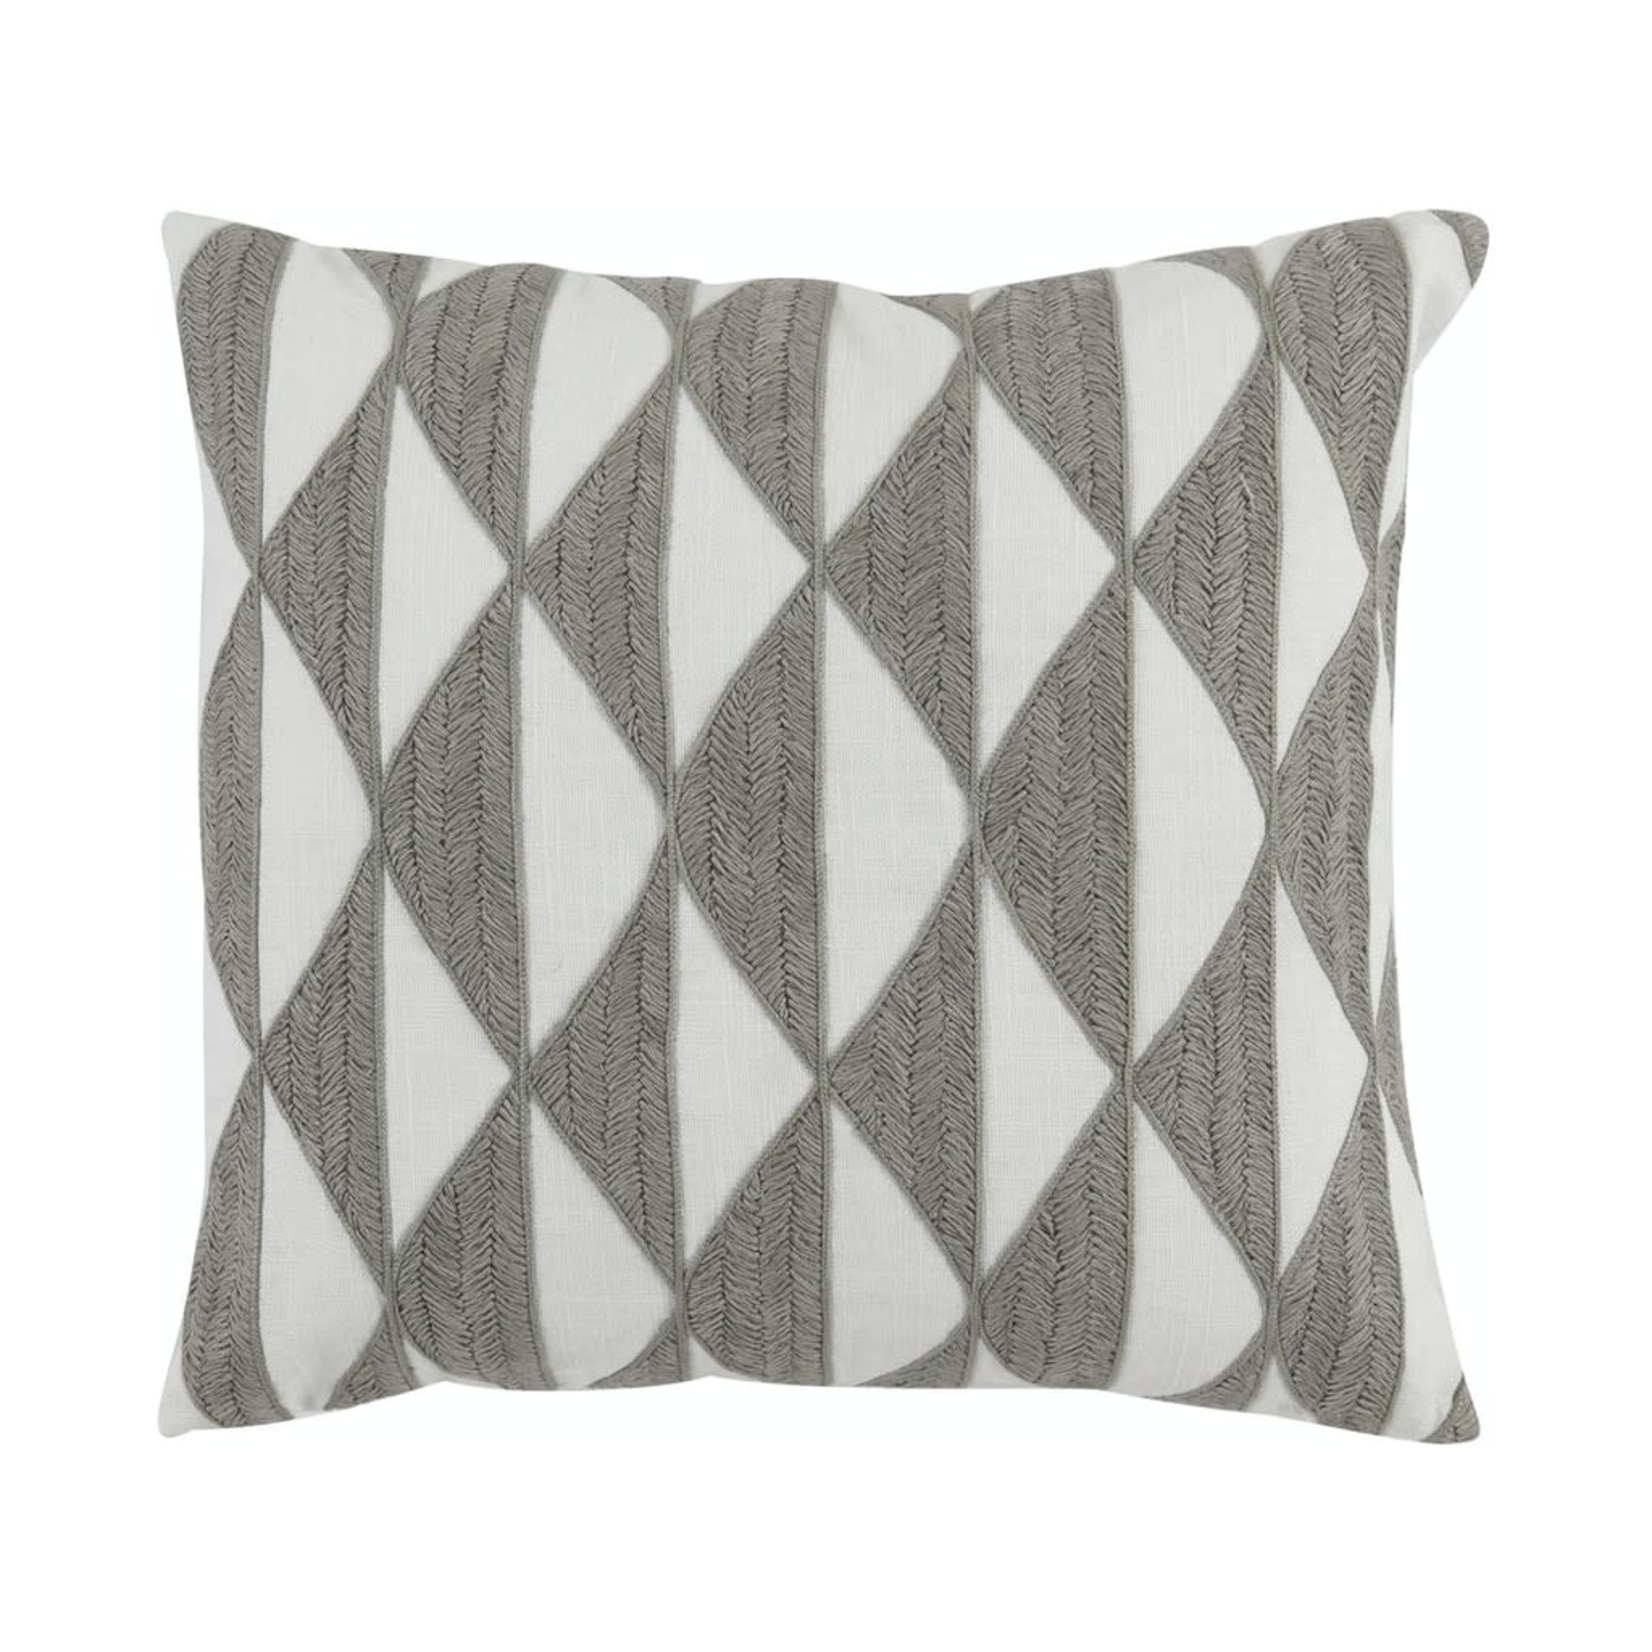 CLASSIC HOME PN COSMICO GRAY 18X18 PILLOW